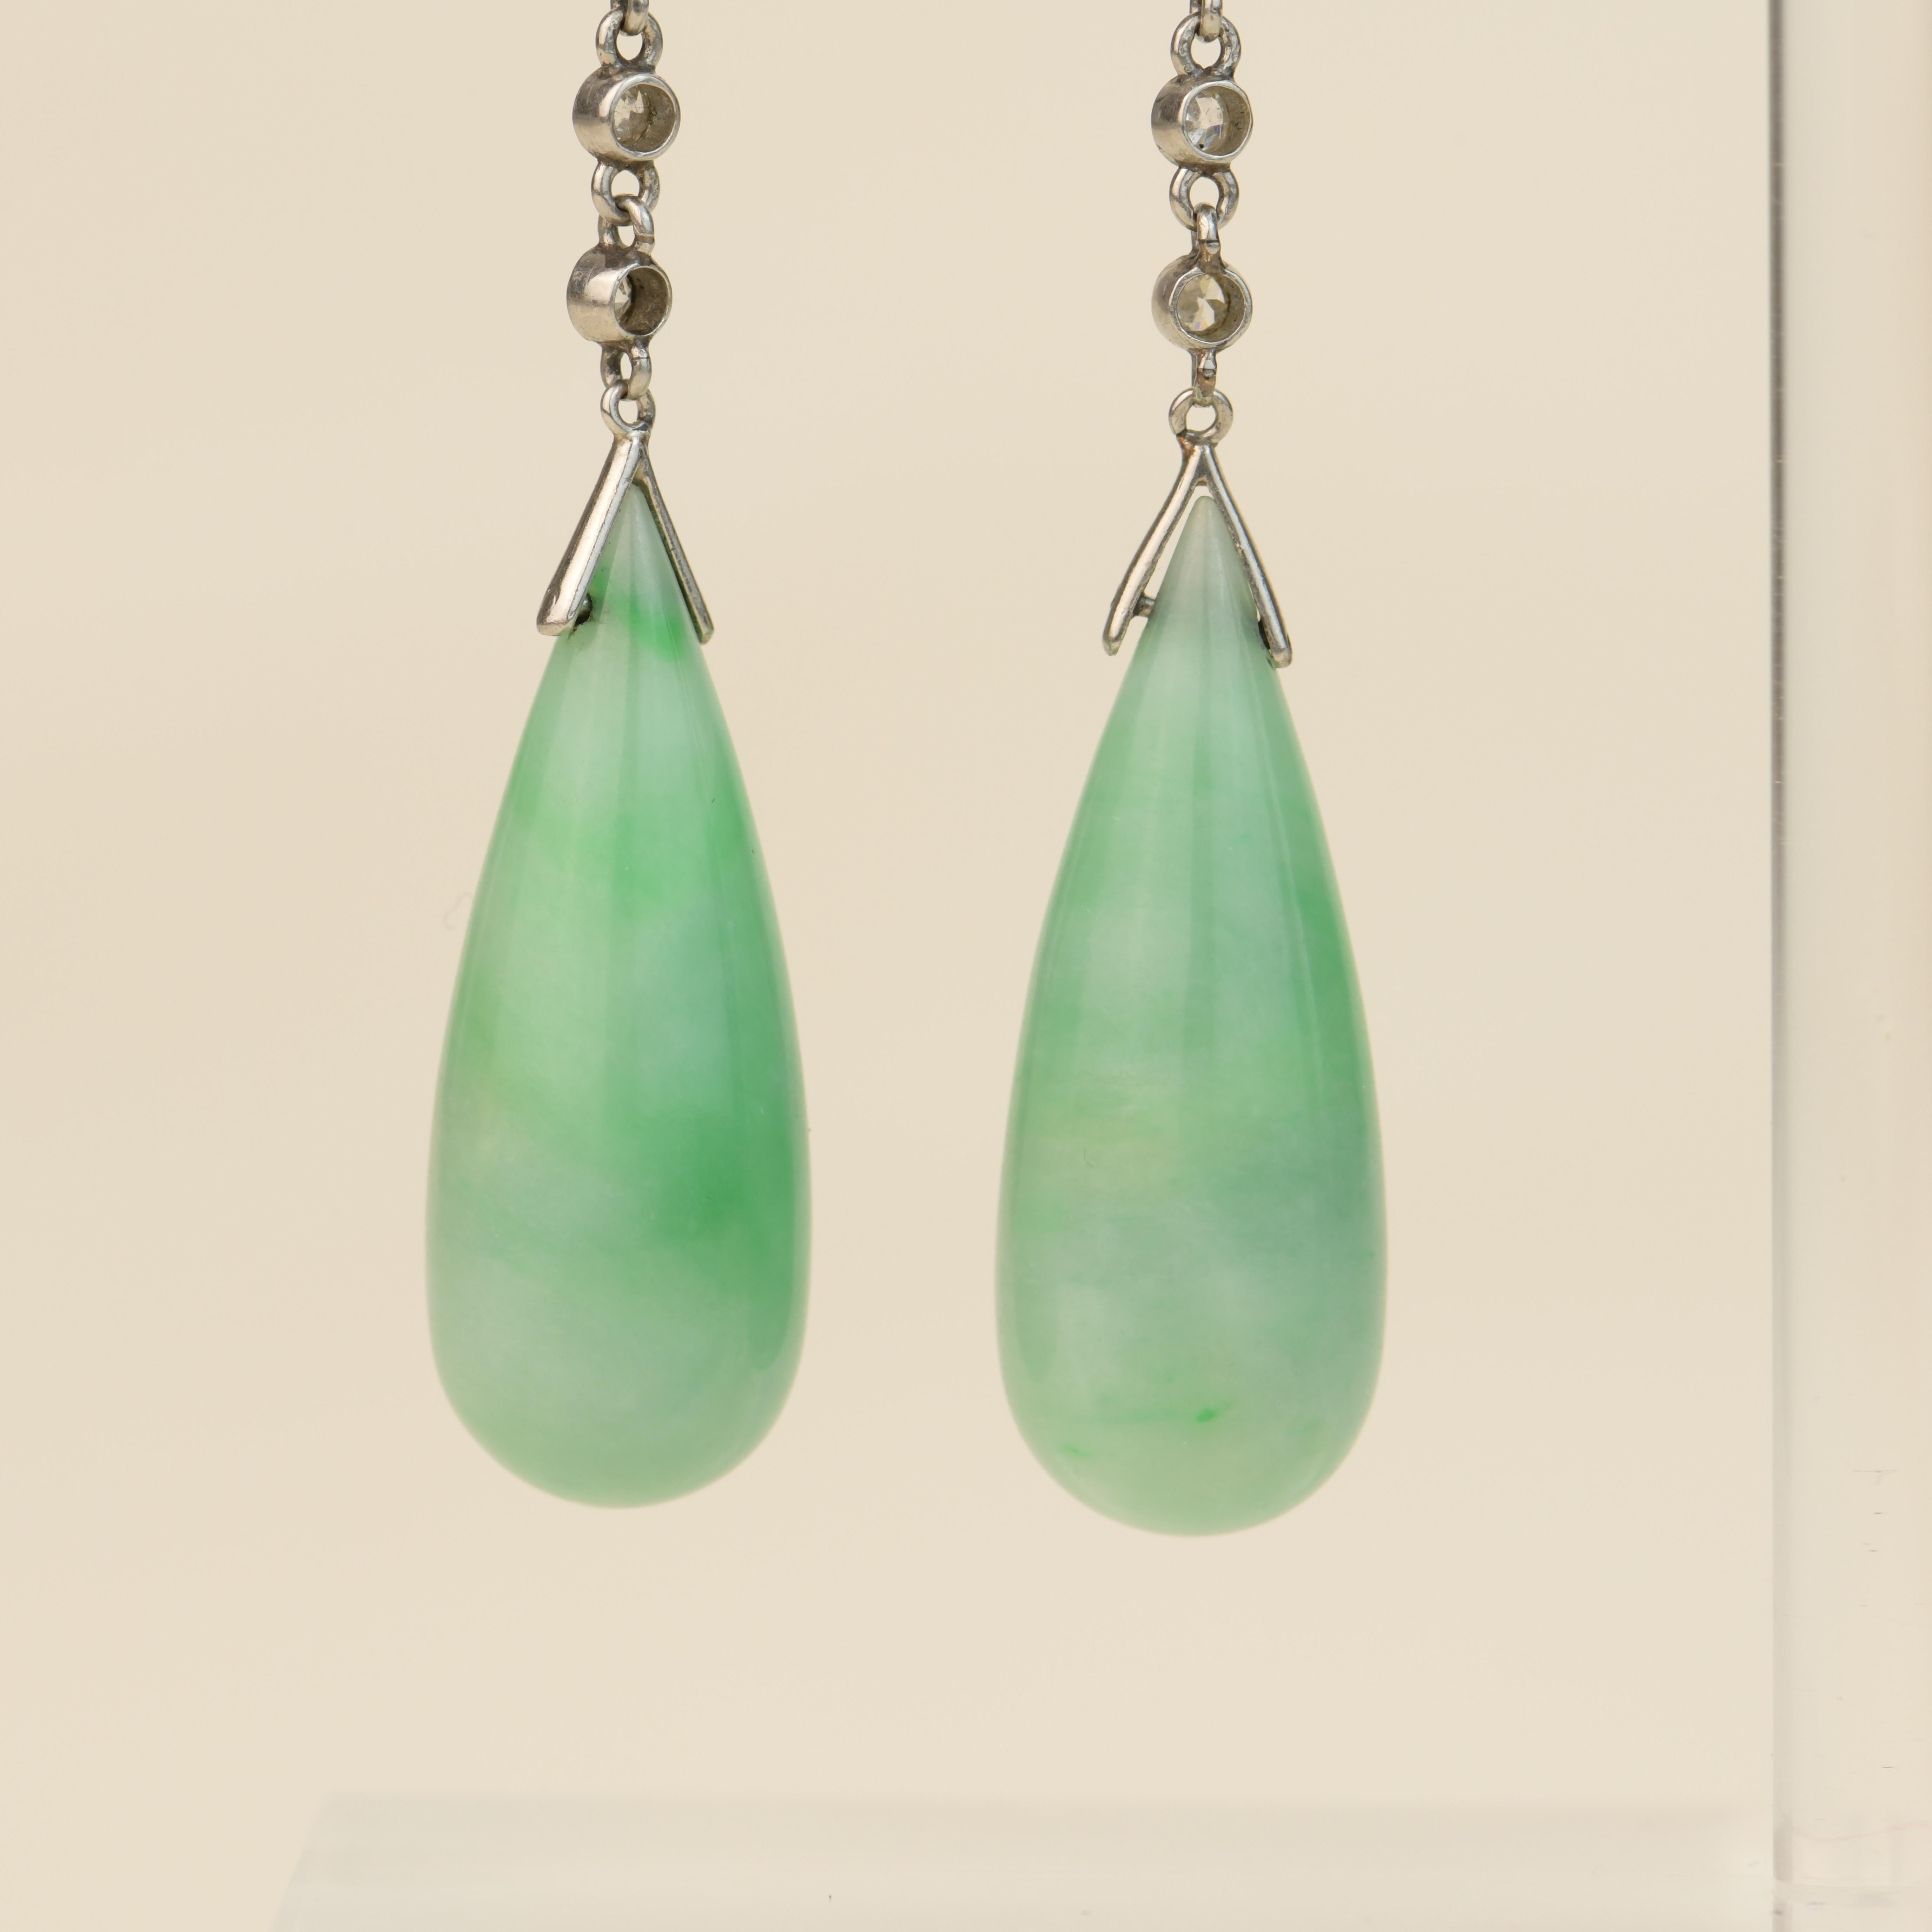 Jade Drop Size：27×10 mm  
18K white gold
Width：10 mm
Weight：12.5g
_________________________________________
Condition Excellent
Comes with Dandelion Antiques Presentation Box _________________________________________
These earrings are so pretty.